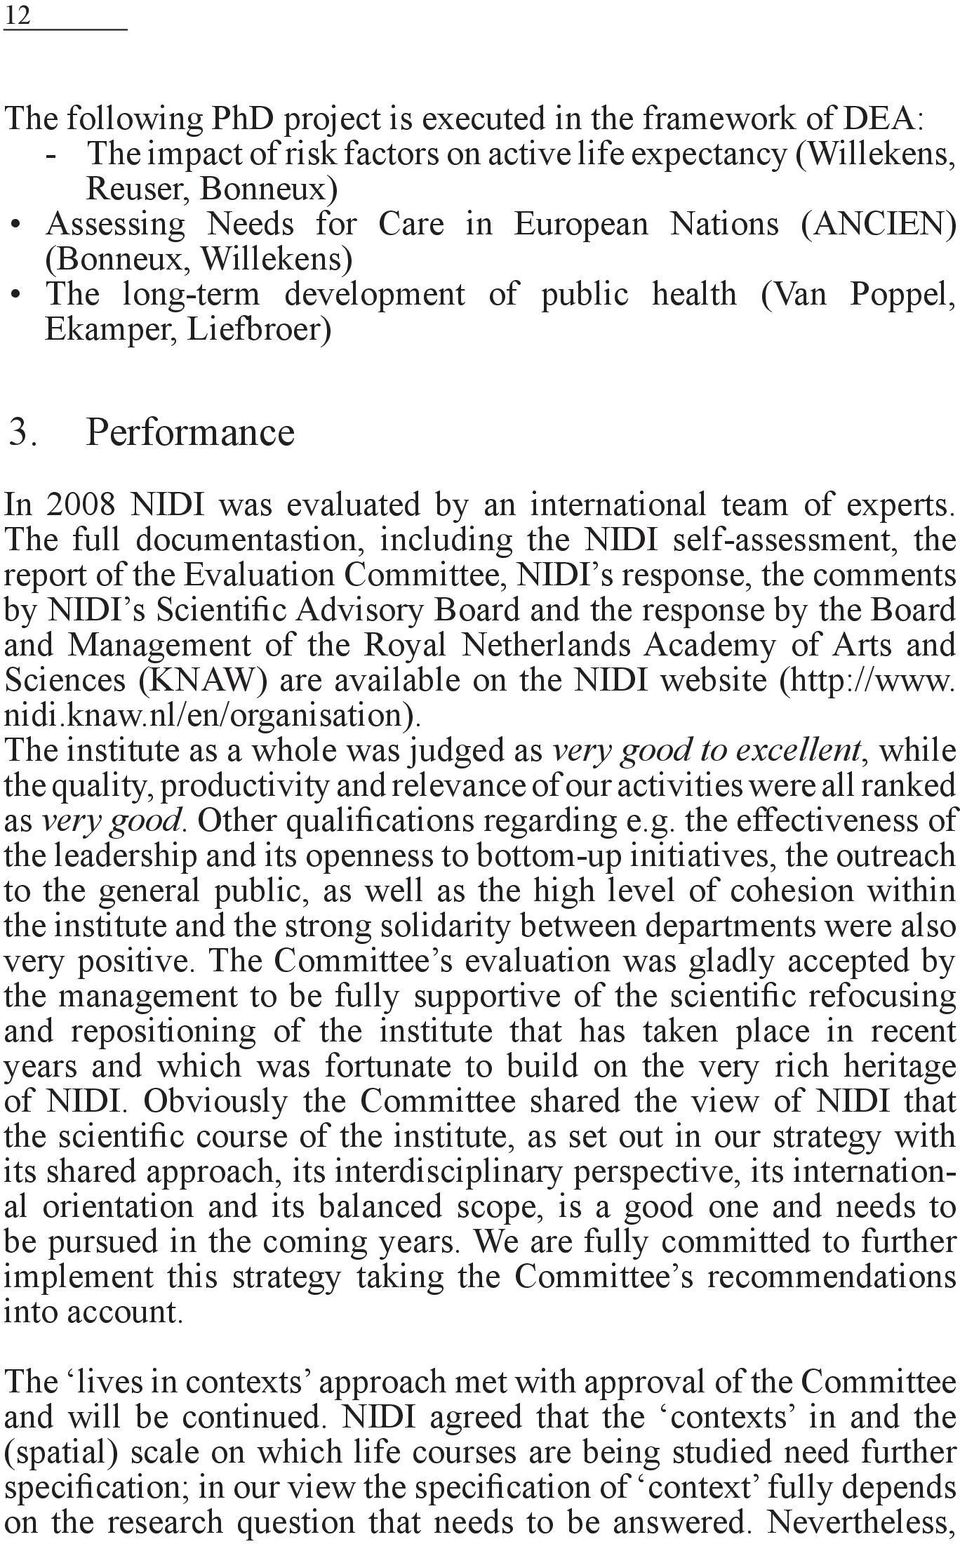 The full documentastion, including the NIDI self-assessment, the report of the Evaluation Committee, NIDI s response, the comments by NIDI s Scientific Advisory Board and the response by the Board